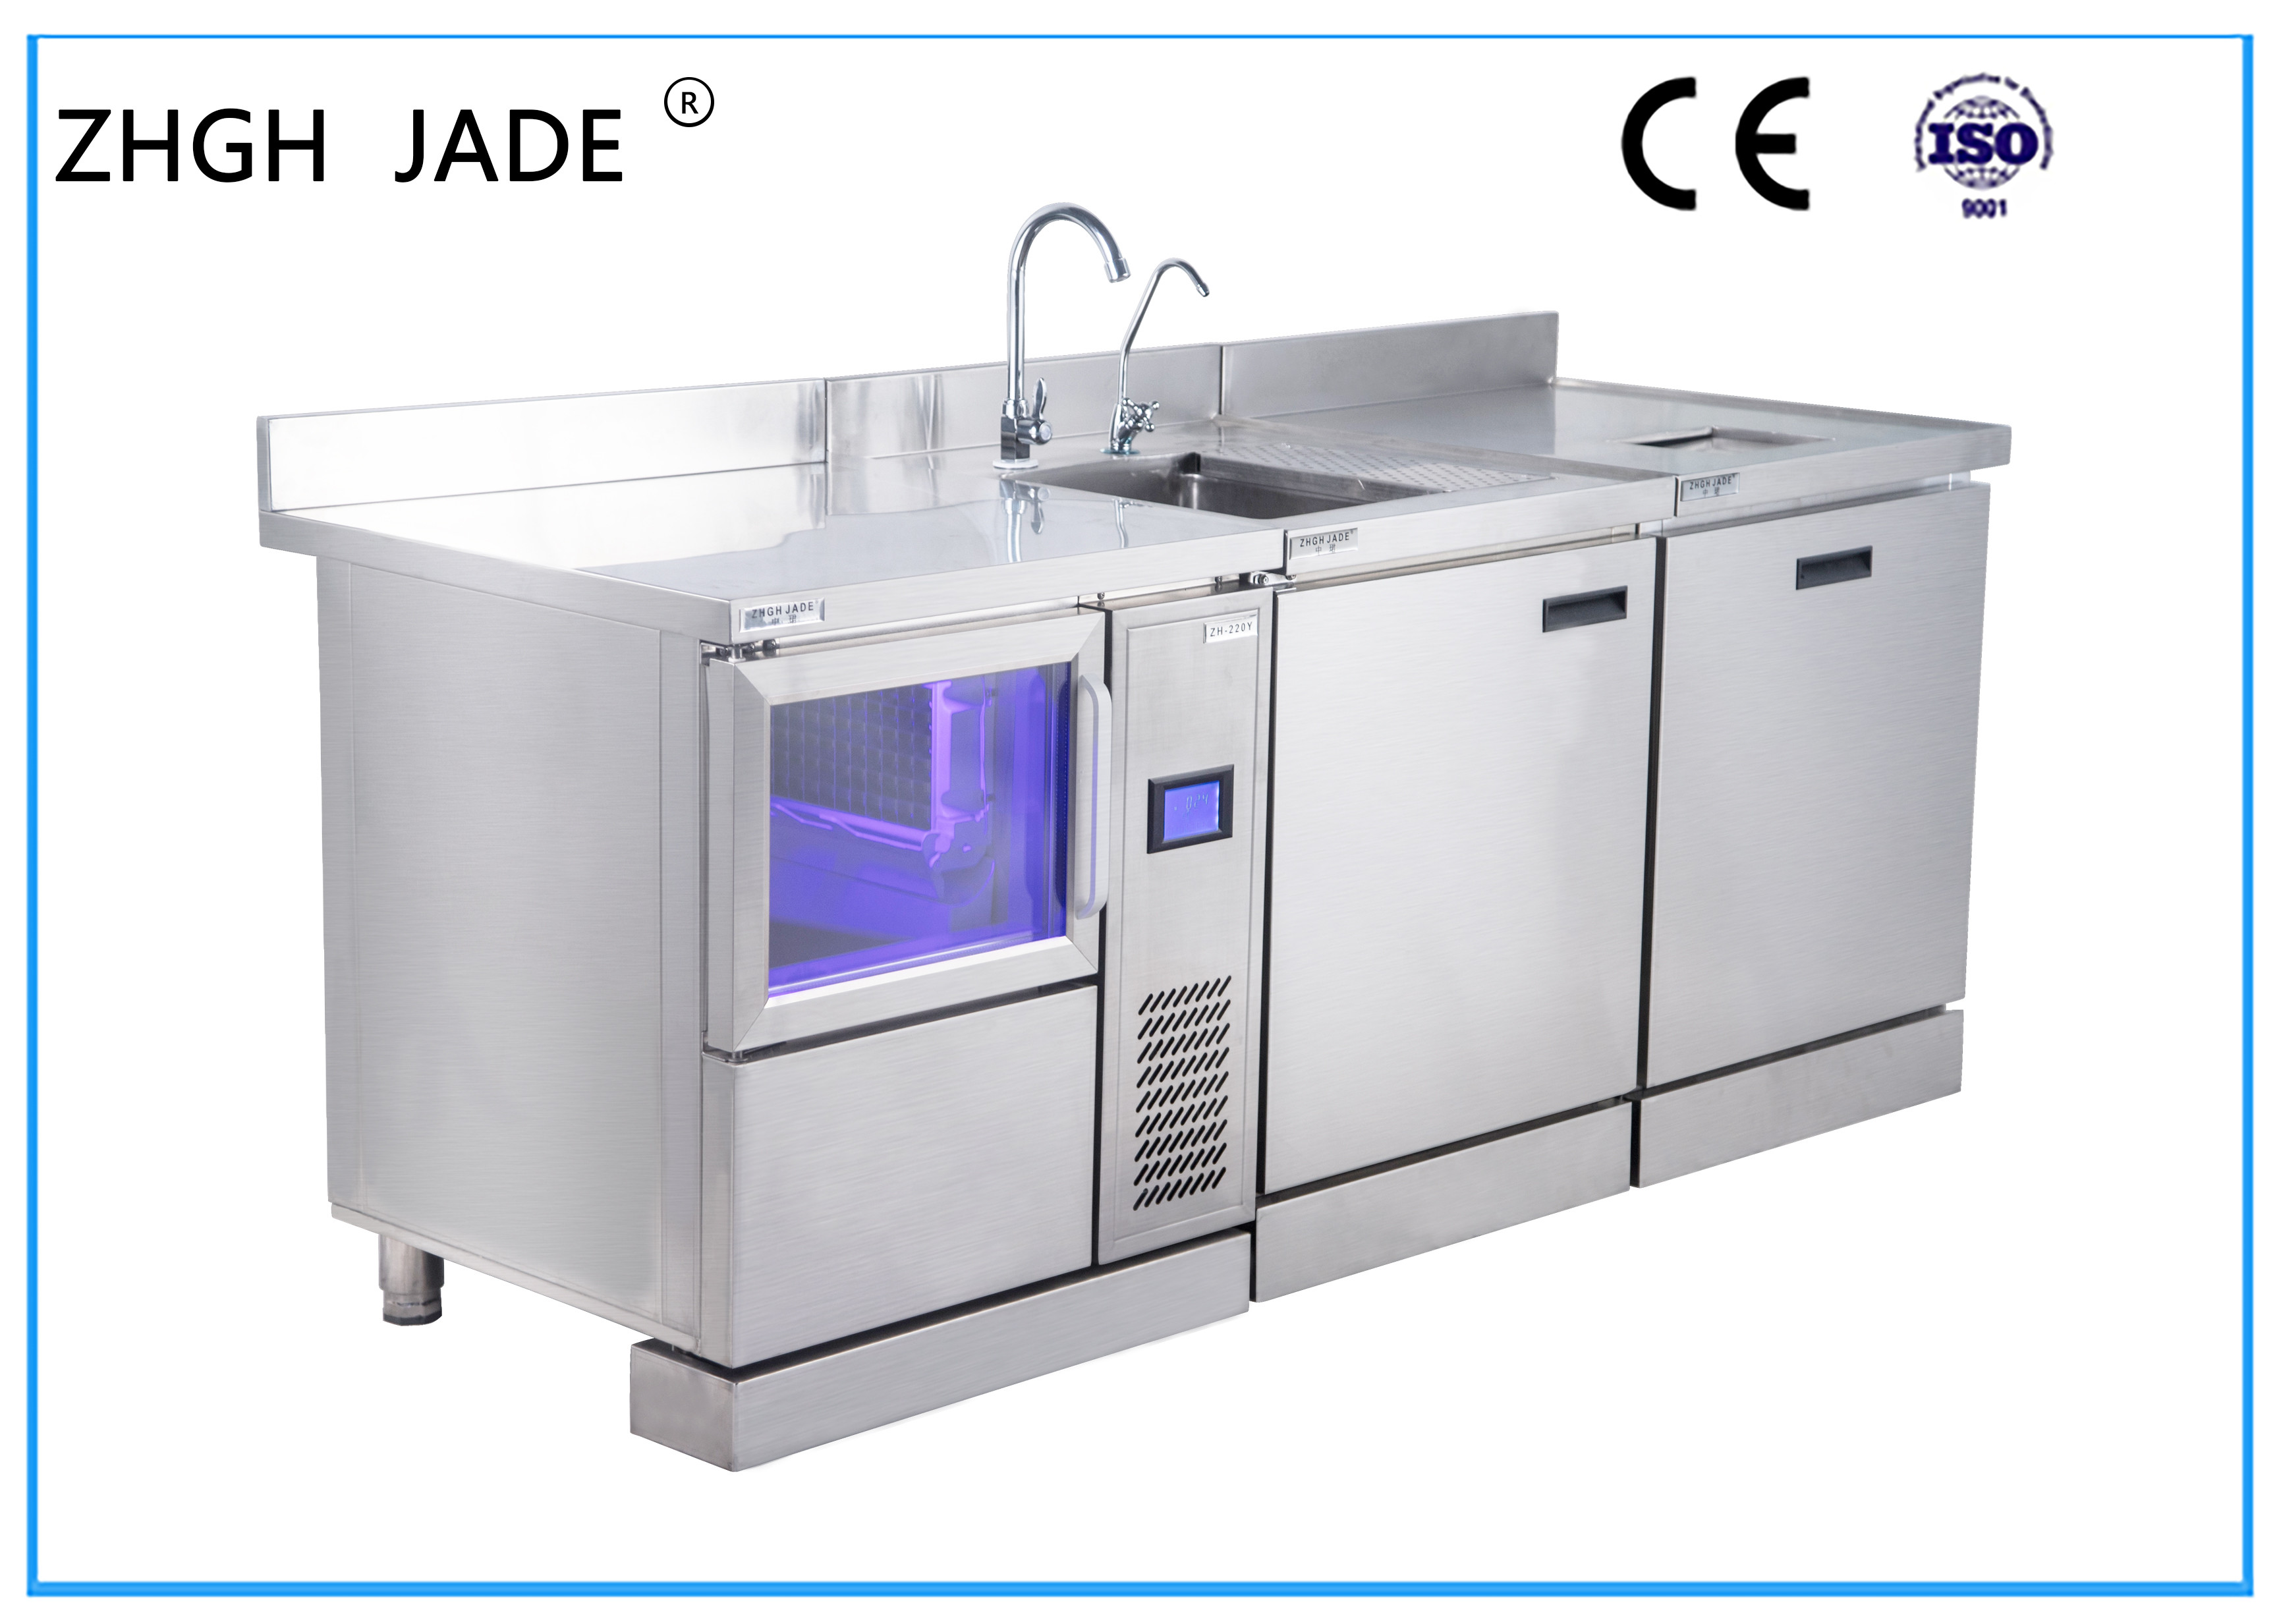 Automatic Stainless Steel Bar Counter For Kitchen 1900 * 700 * 800MM